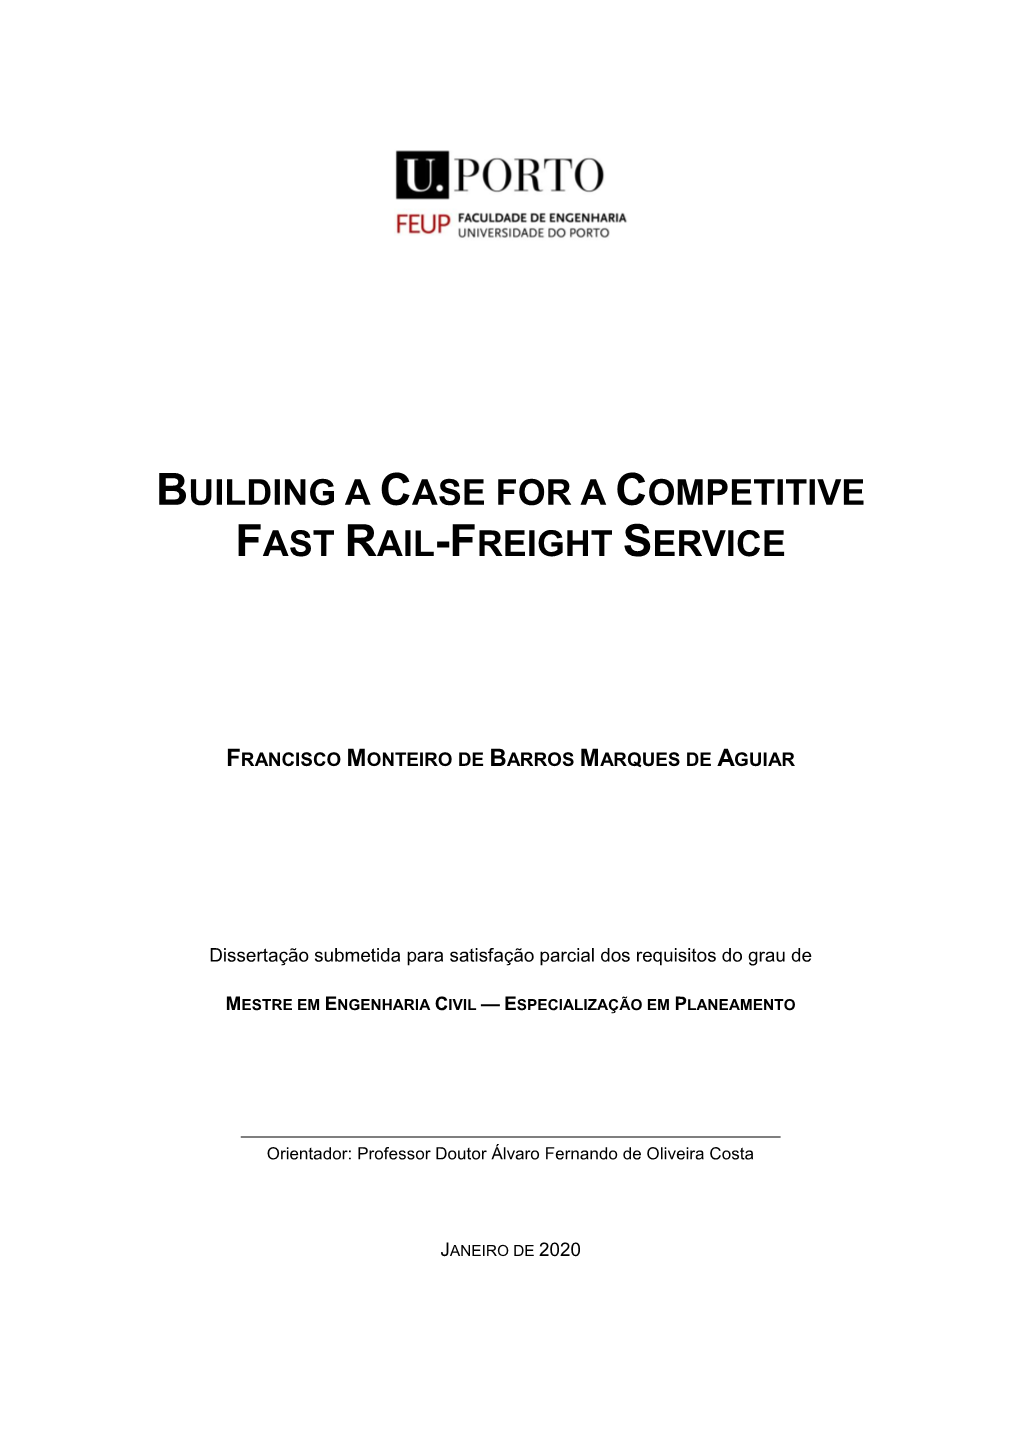 Building a Case for a Competitive Fast Rail-Freight Service